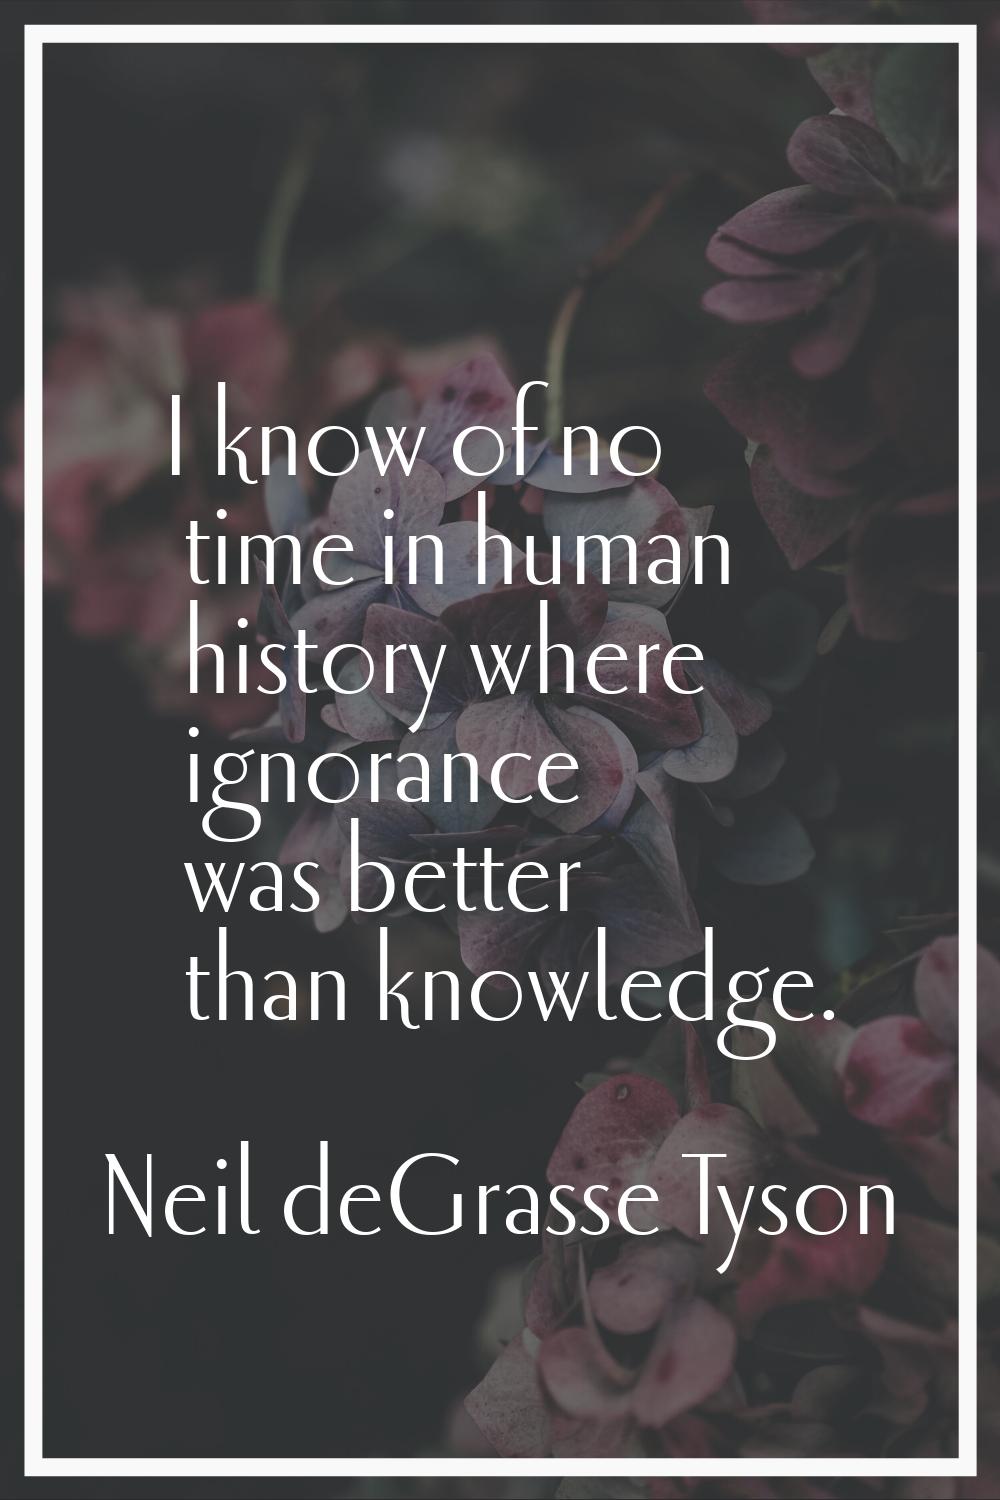 I know of no time in human history where ignorance was better than knowledge.